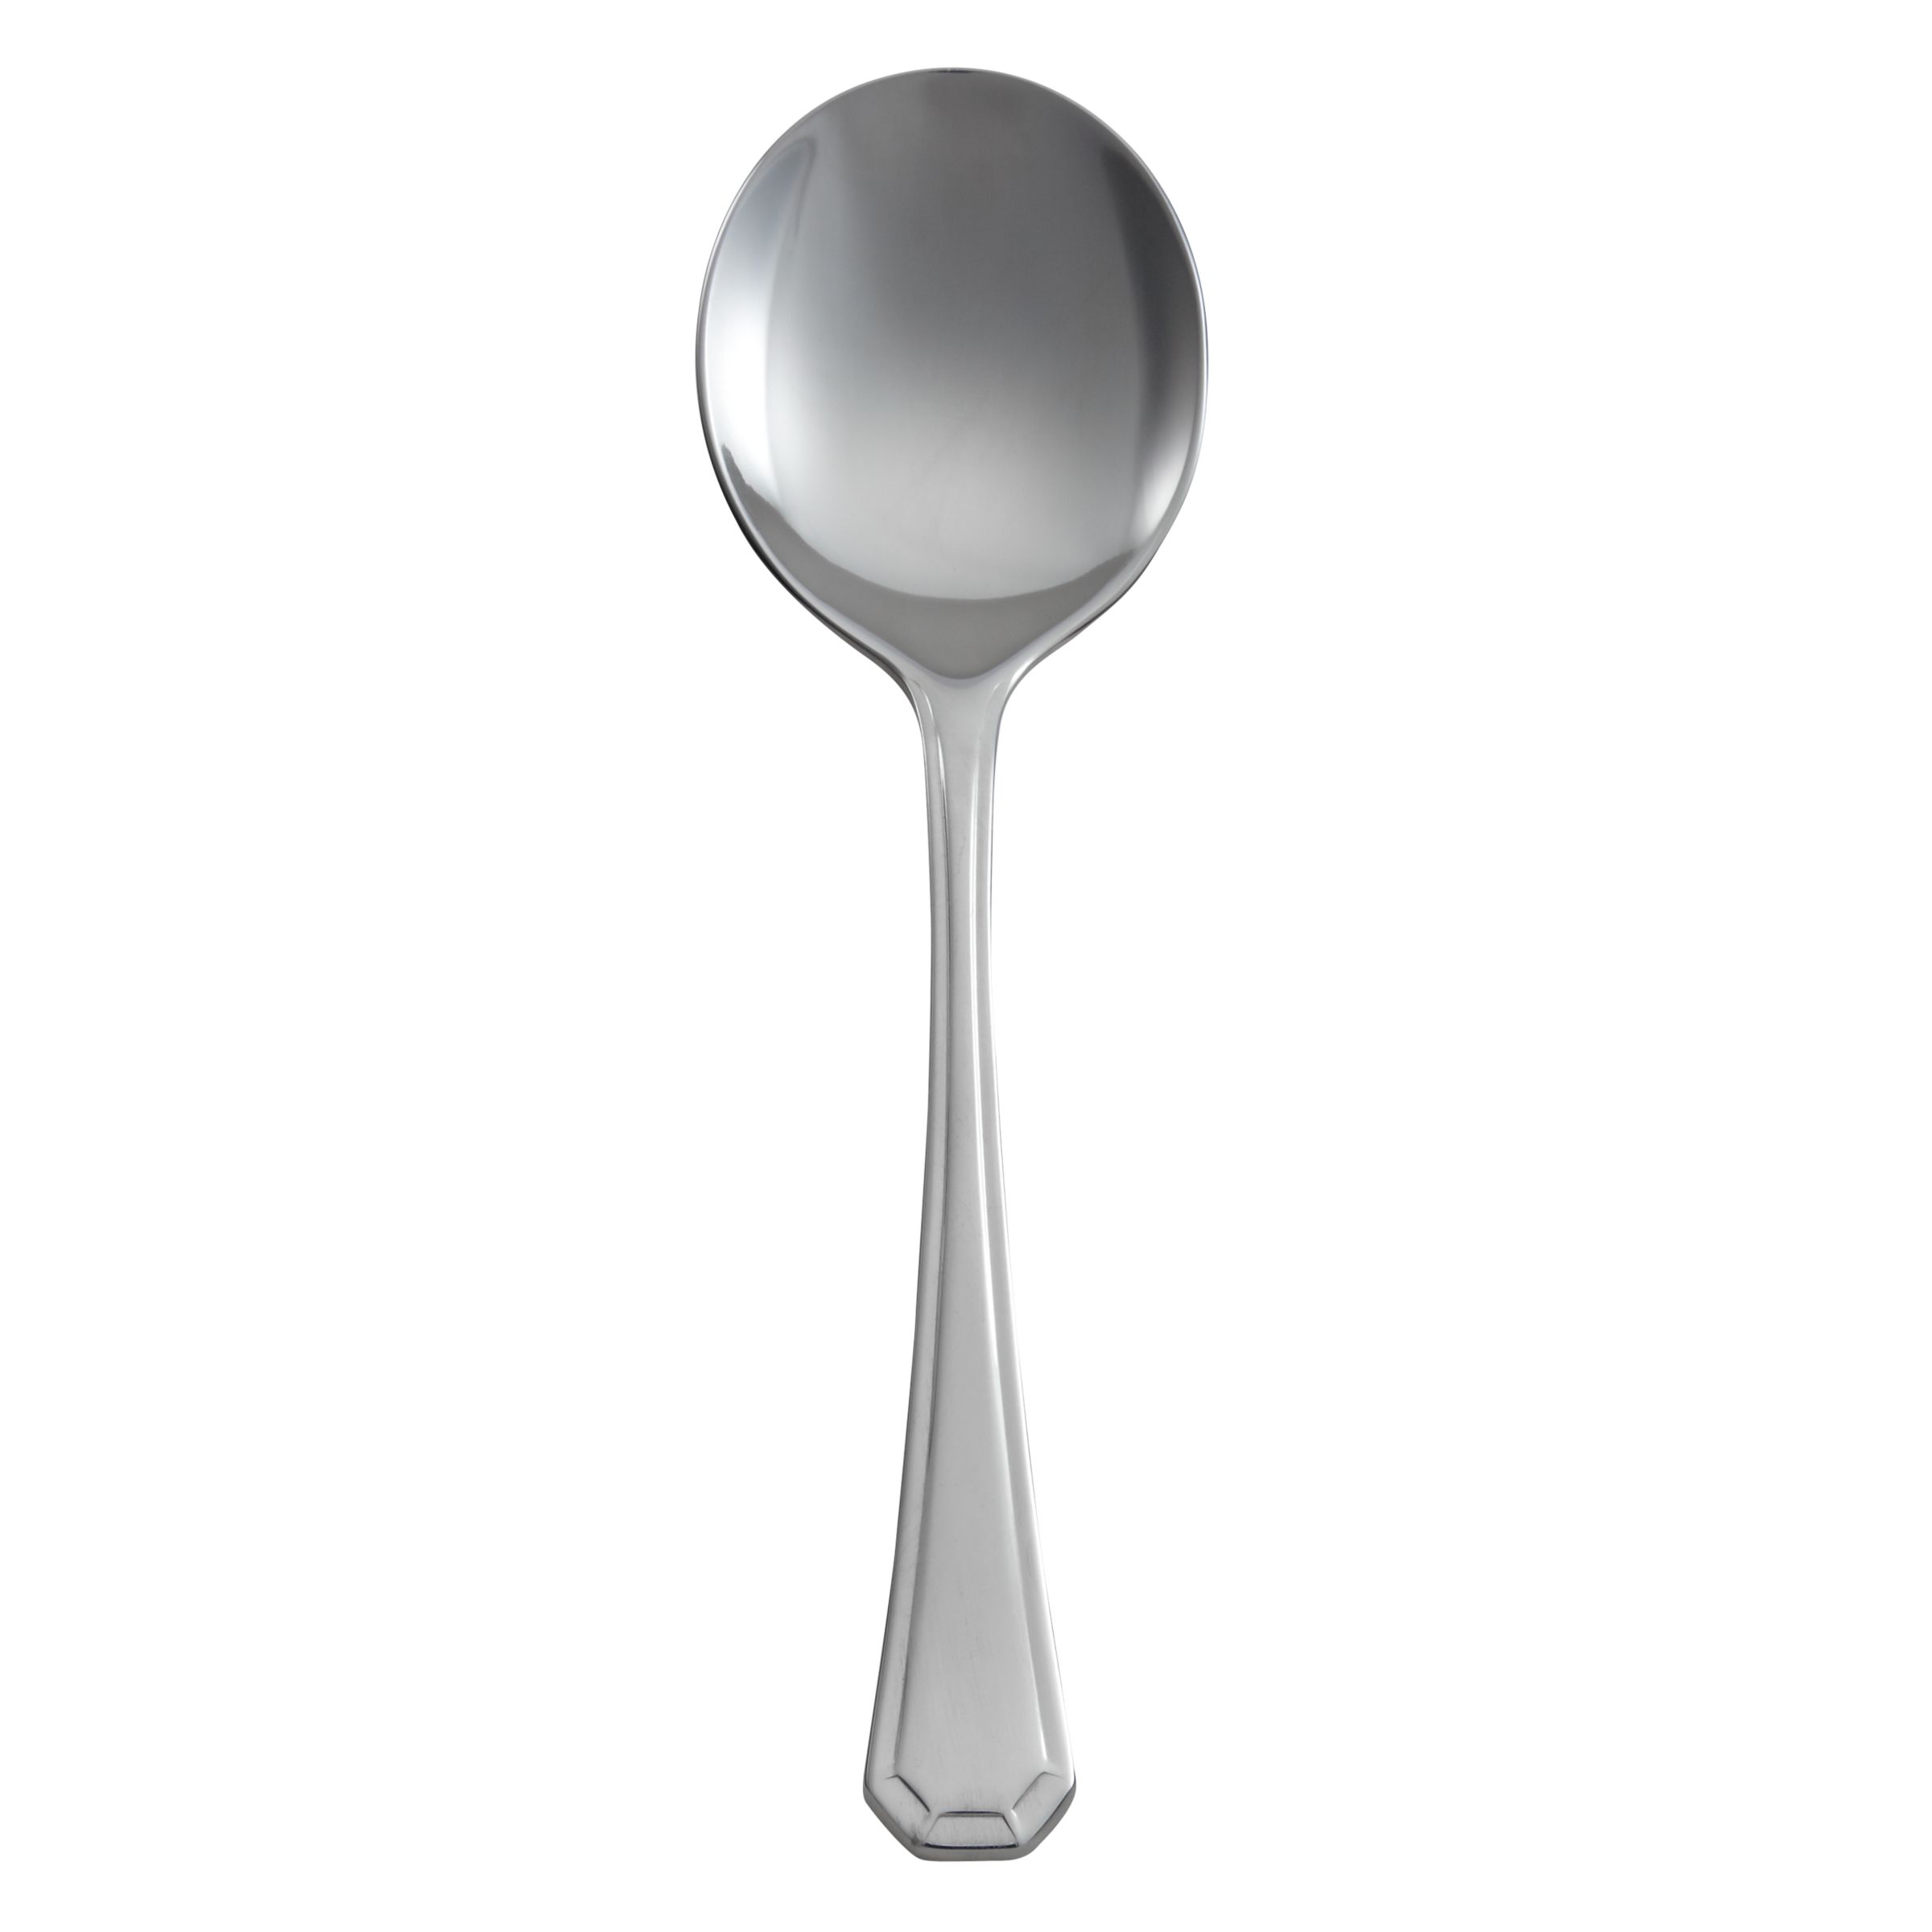 Arthur Price Grecian Soup Spoon, Stainless Steel